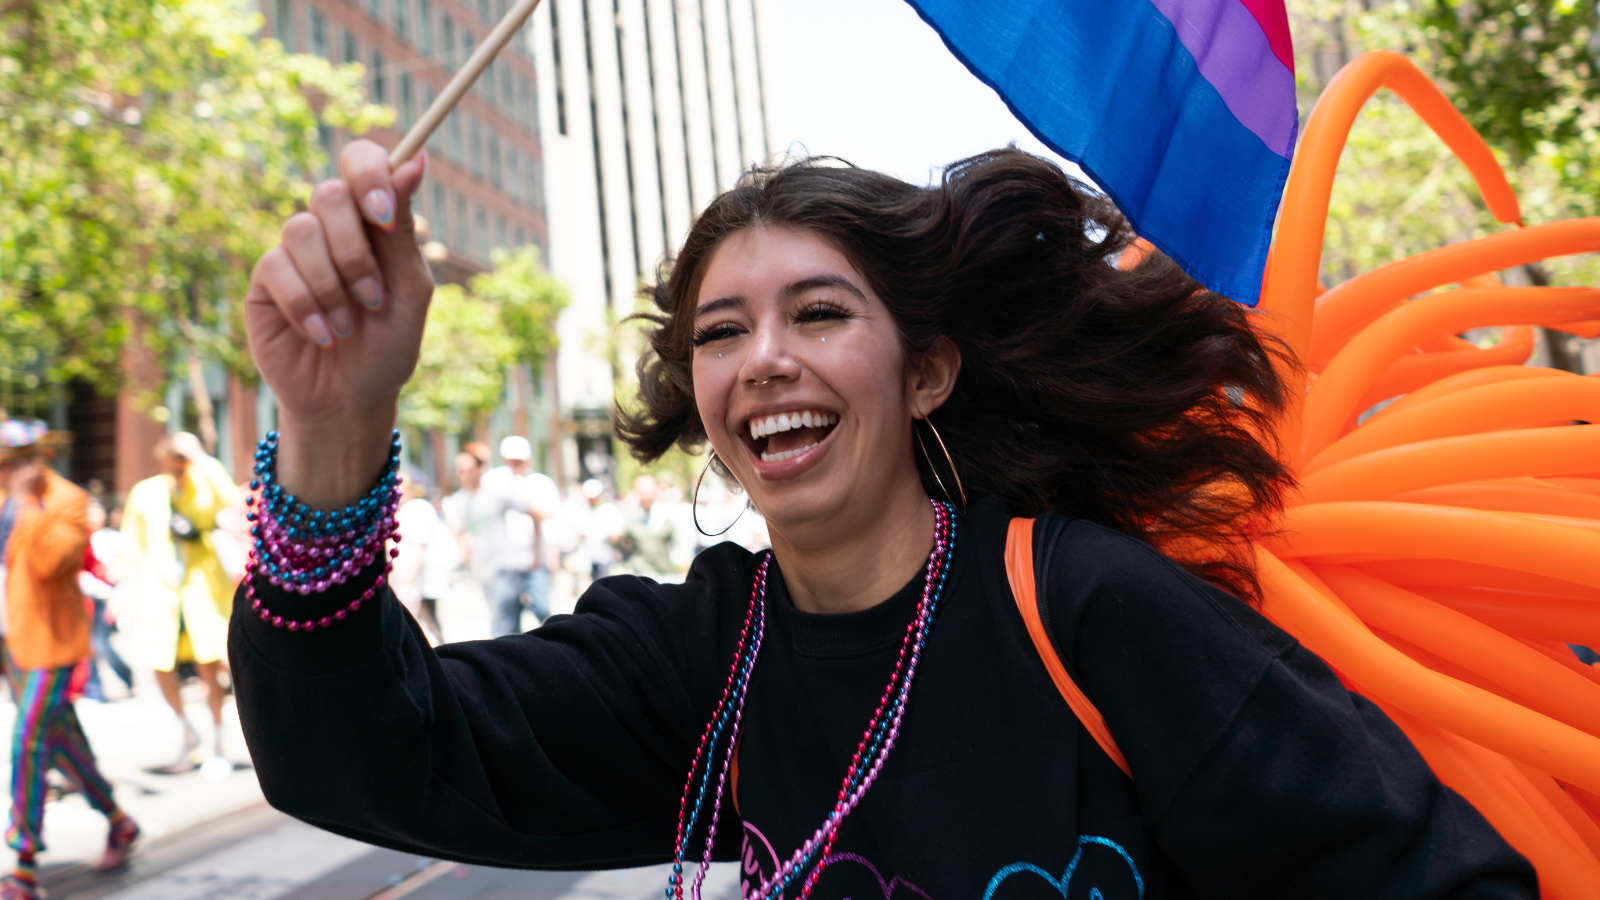 A Prideful Week of Celebration at Comcast California